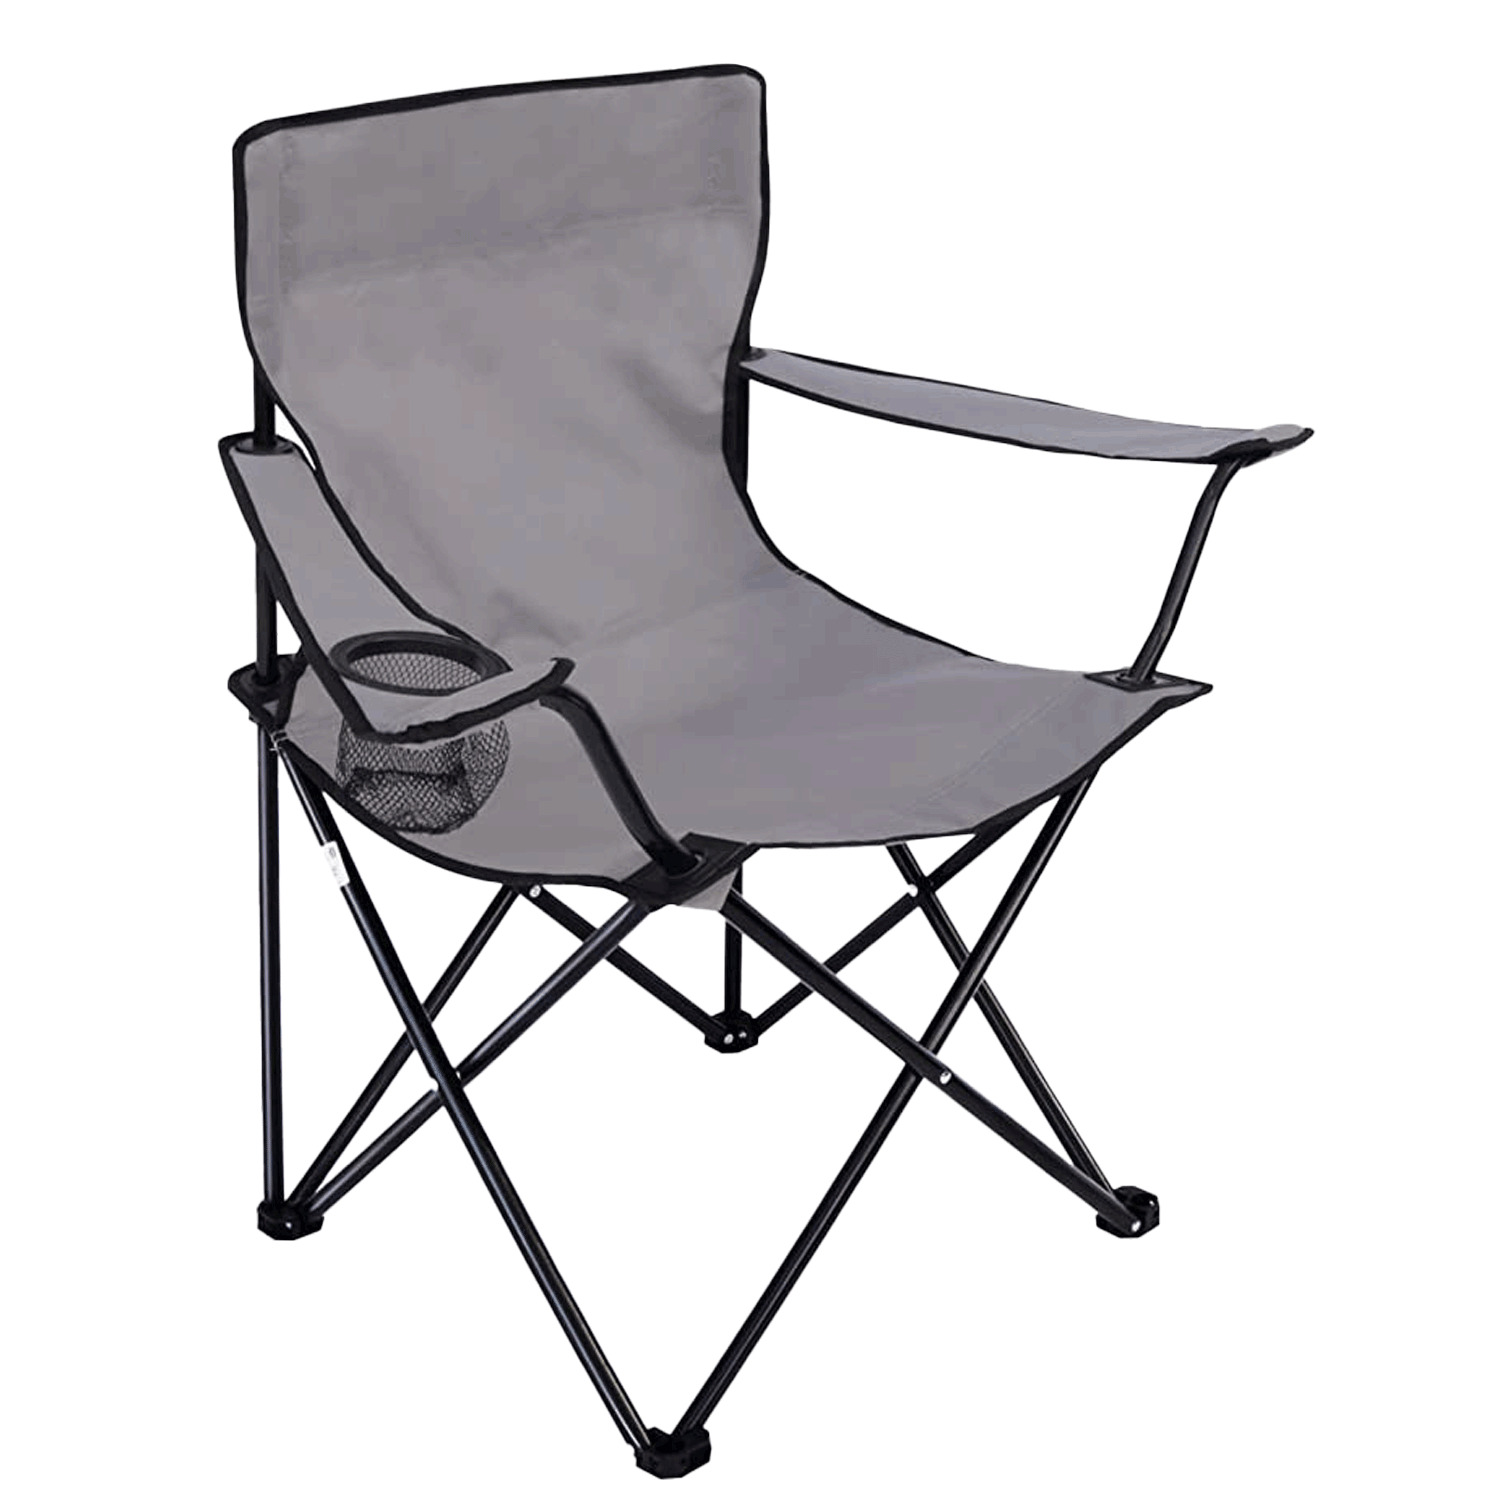 Folding Camp Chair With A Mesh Cup Holder And Armrest 77388 1 